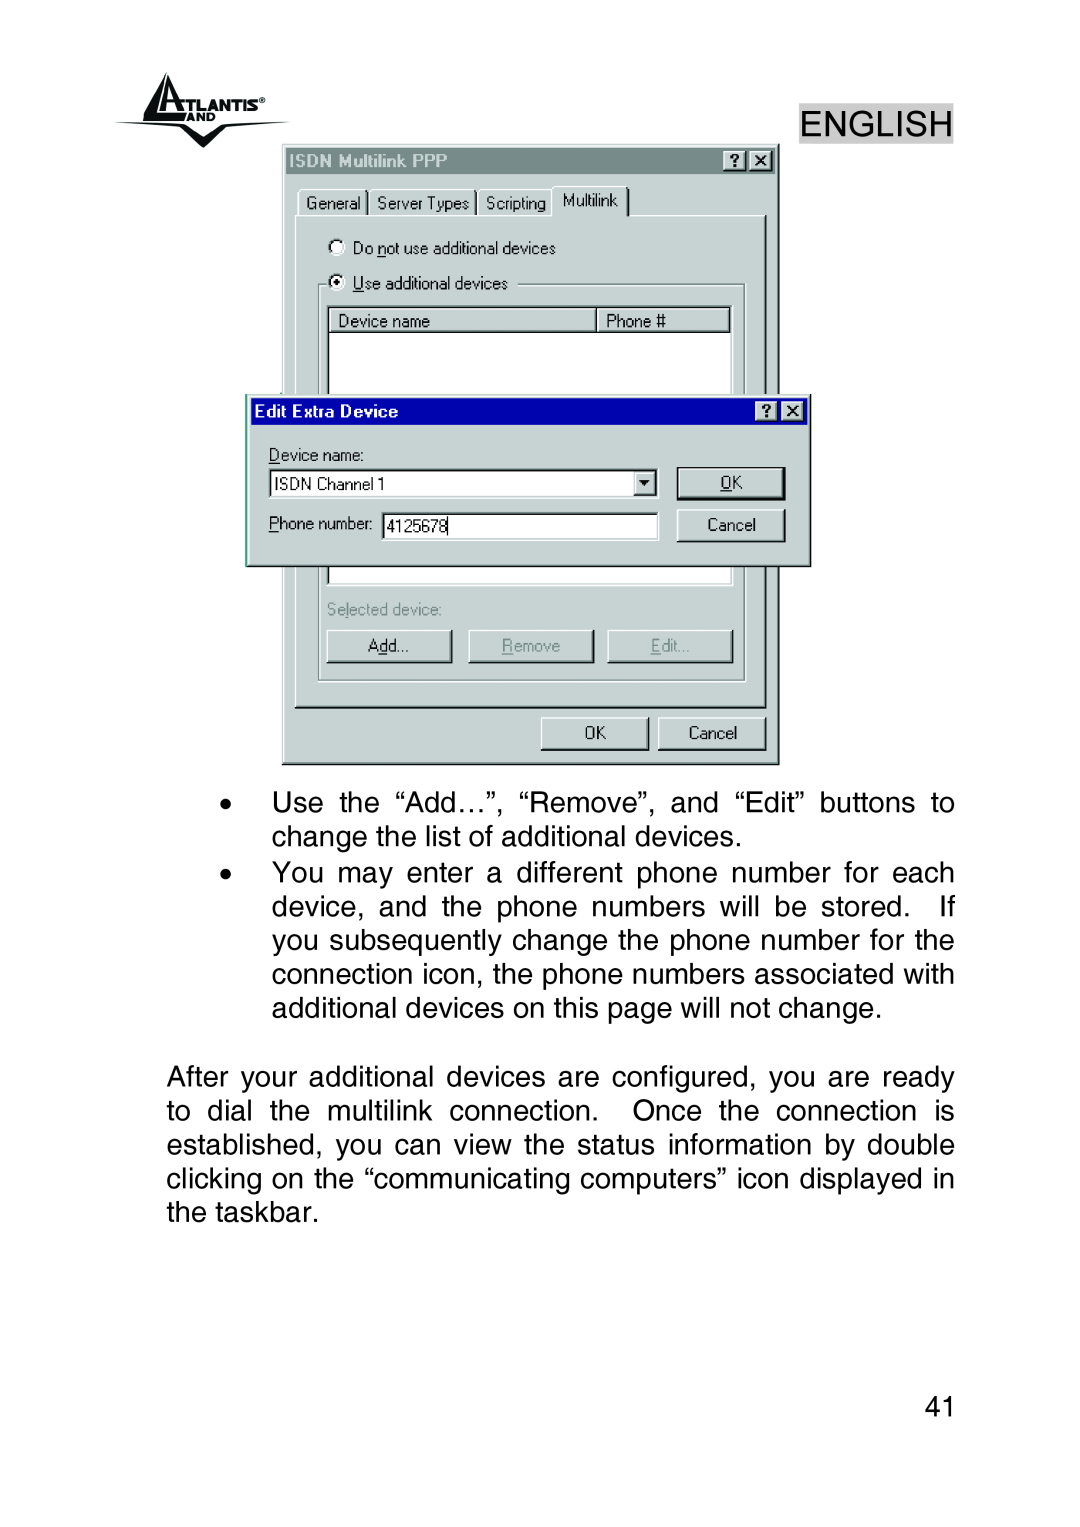 Atlantis Land A01-IU1 manual Use the “Add…”, “Remove”, and “Edit” buttons to change the list of additional devices 